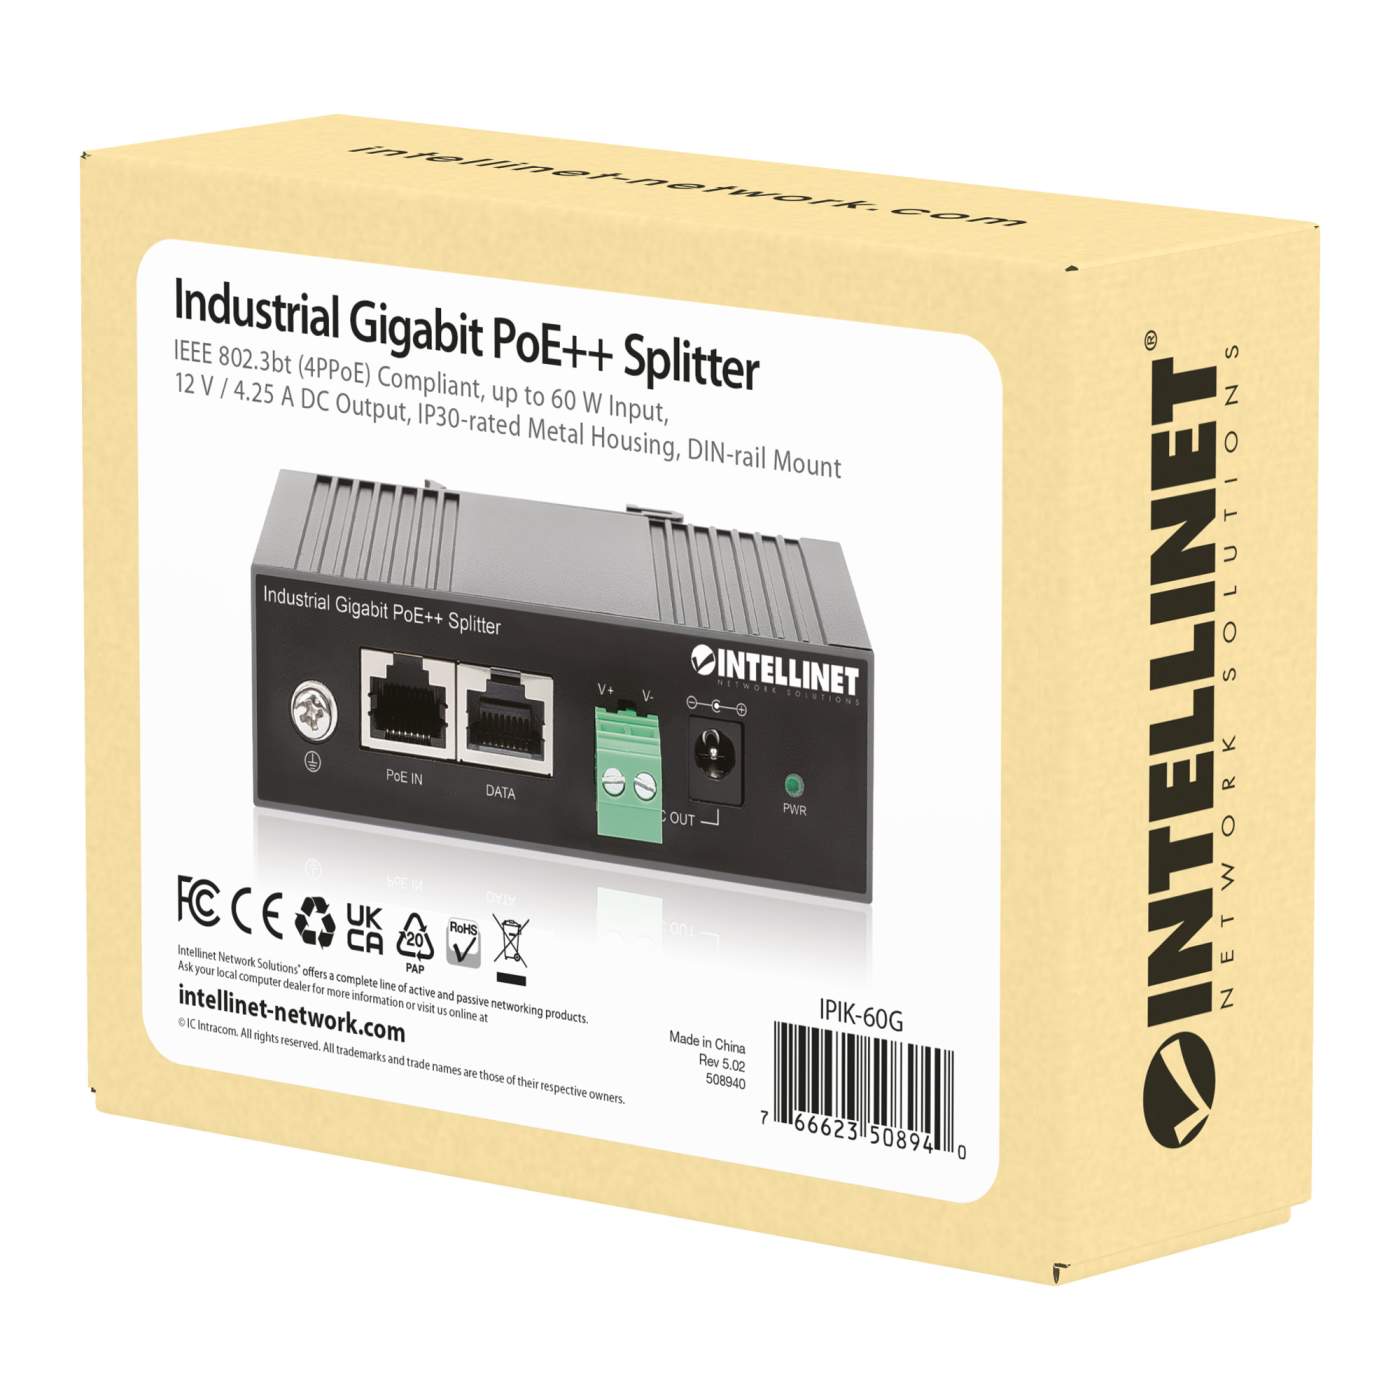 LINOVISION POE Splitter Power Over Ethernet with 2 DC 12V Output IEEE